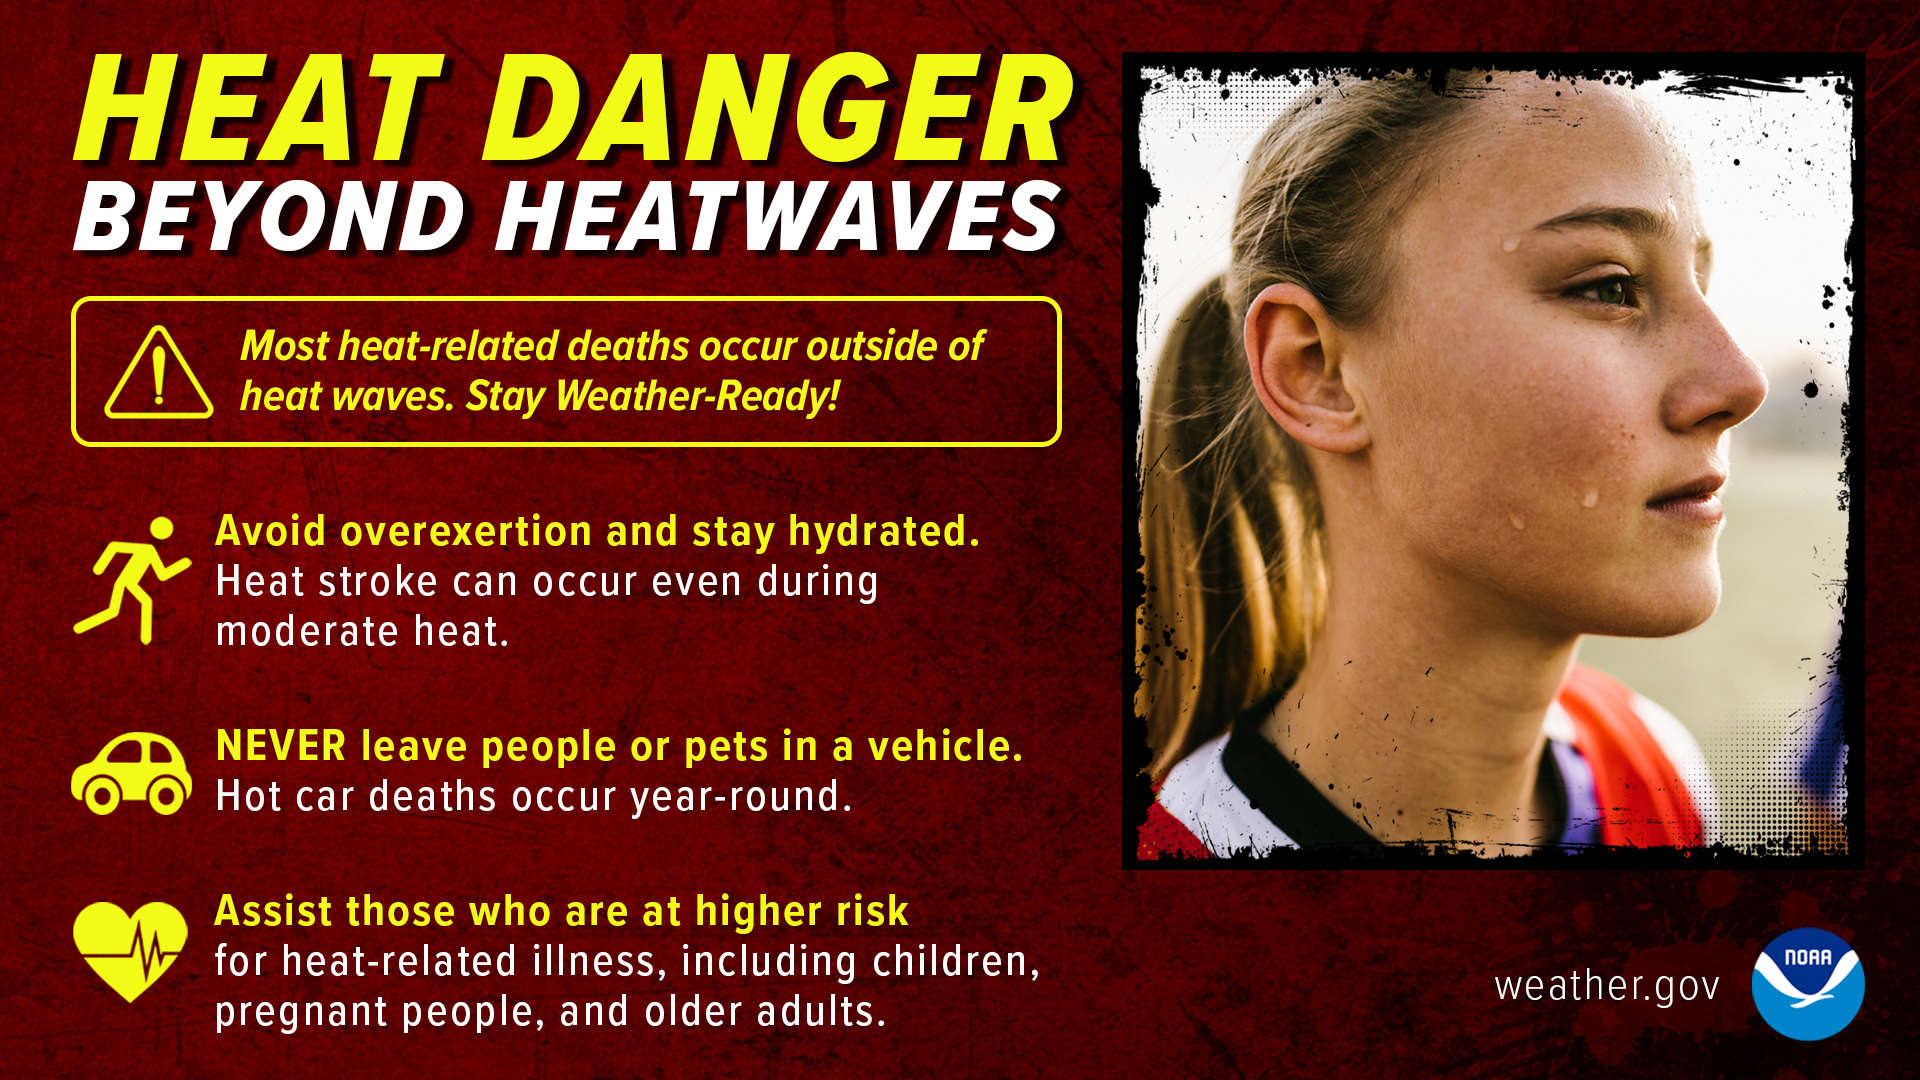 Heat Danger Beyond Heatwaves: most heat-related deaths occur outside of heat waves. Stay Weather-Ready! Avoid overexertion and stay hydrated. Heat stroke can occur even during moderate heat. Never leave people or pets in a vehicle. Hot car deaths occur year-round. Assist those who are at higher risk for heat-related illness, including children, pregnant people, and other adults.